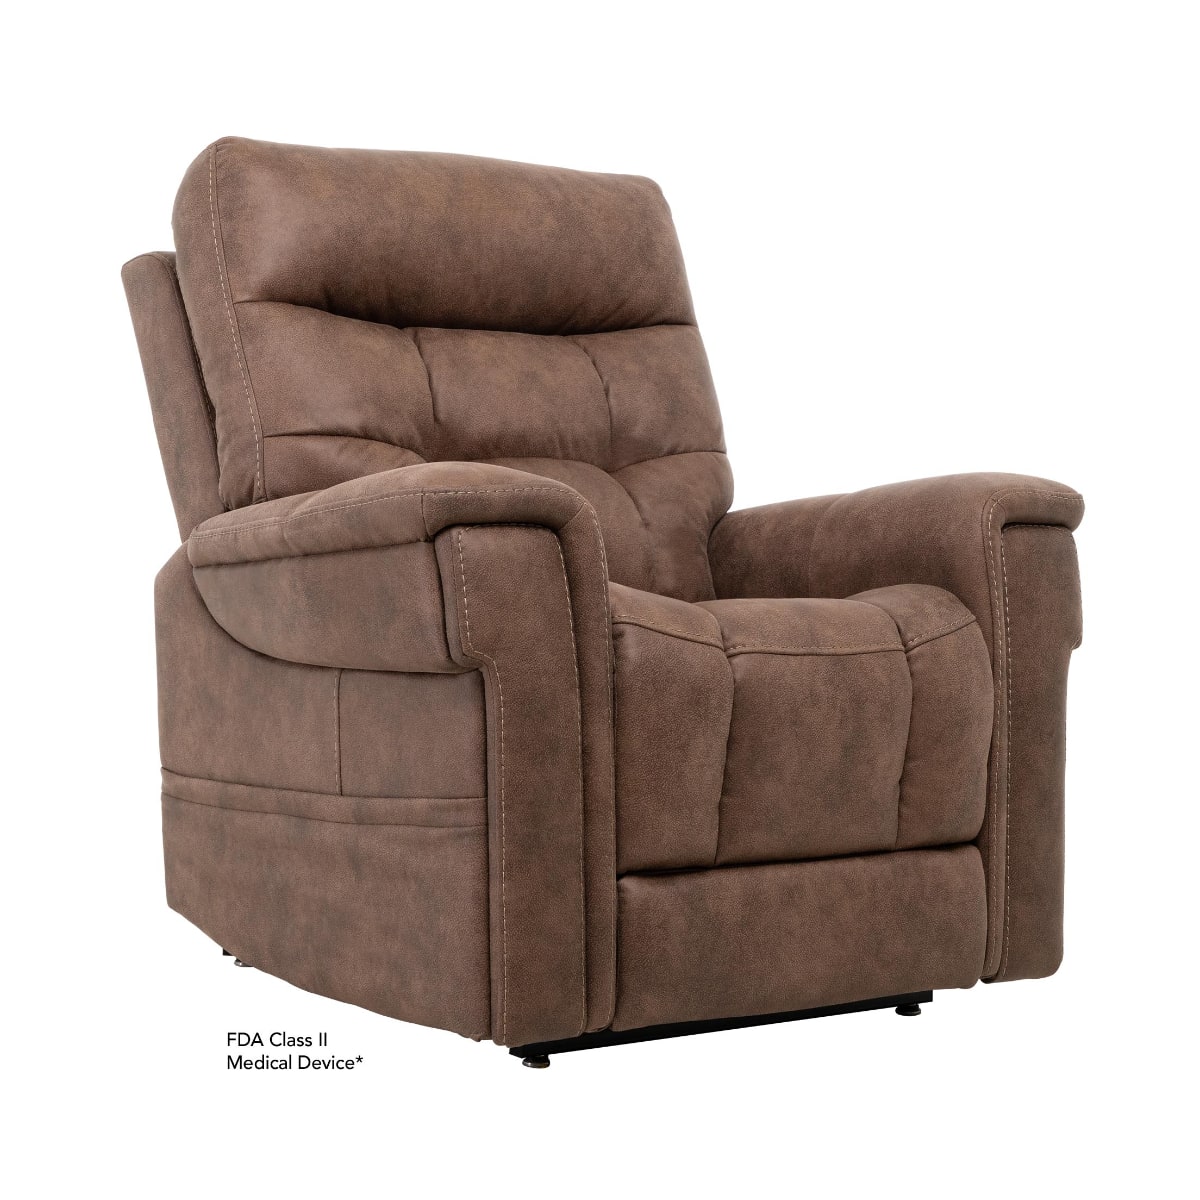 Pride VivaLift Radiance reclining lift chair in brown